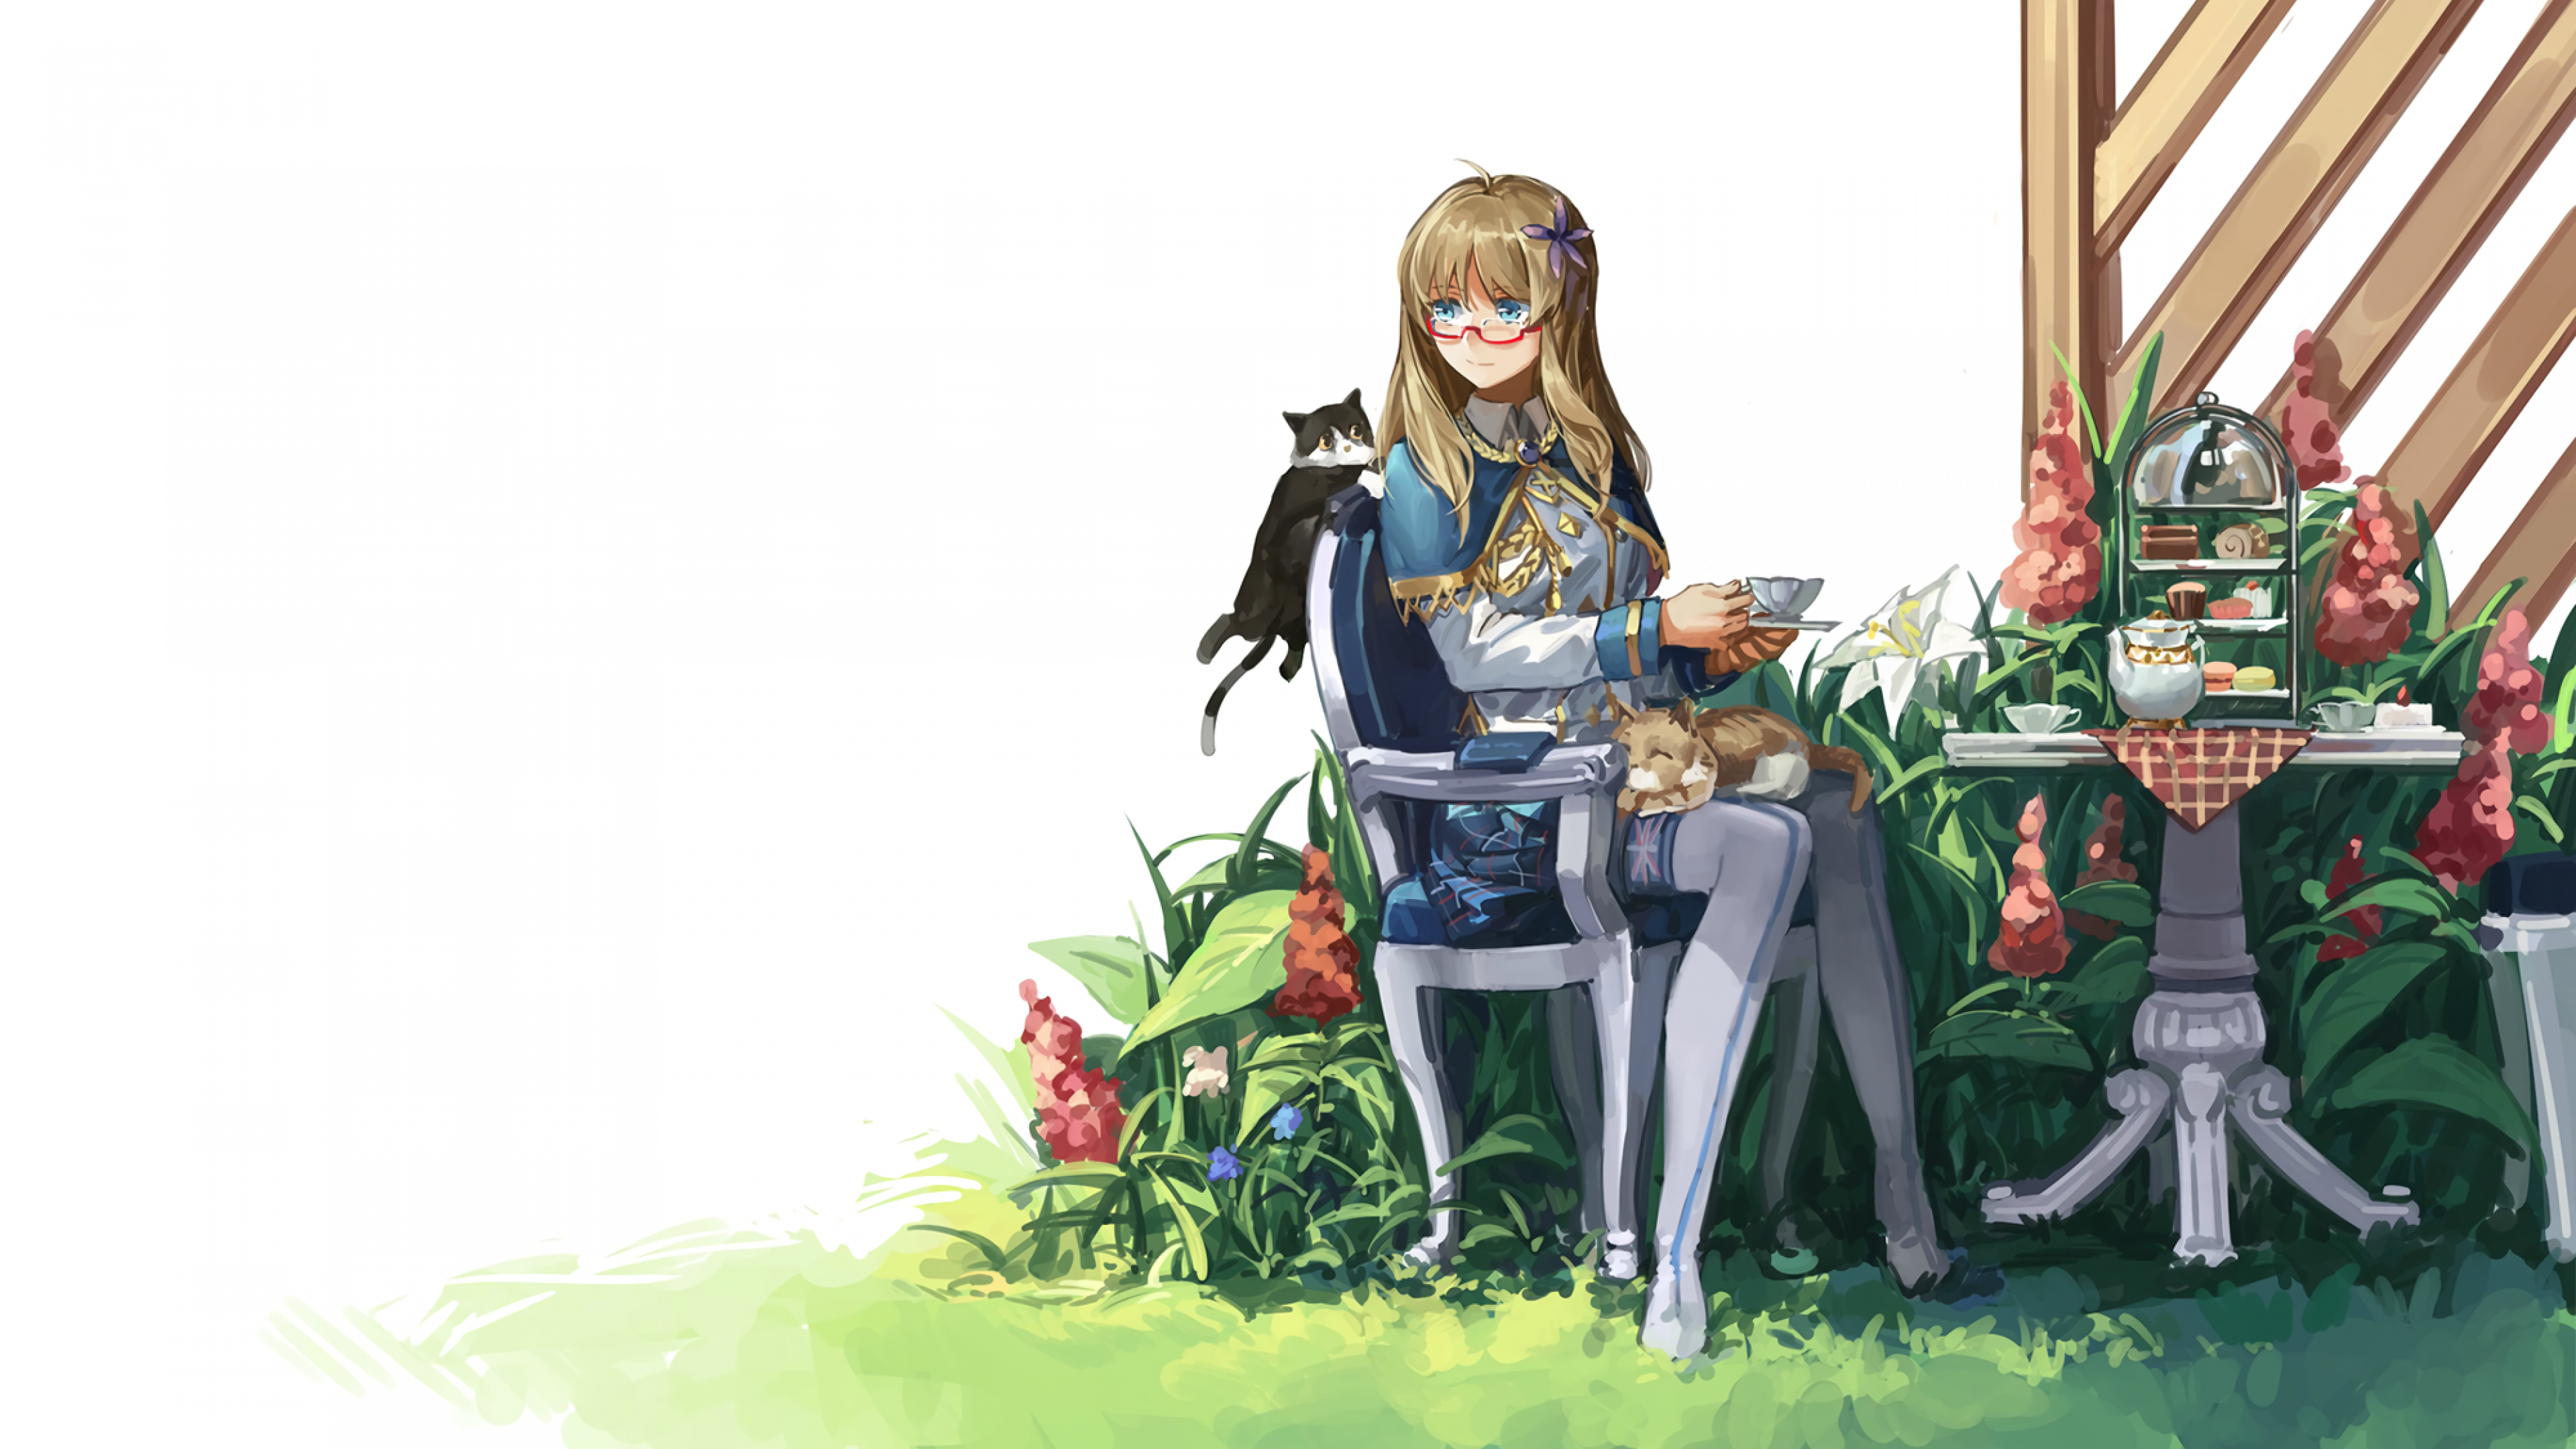 Download 3840x2160 Anime Girl, Glasses, Sitting, Coffee, Drinking